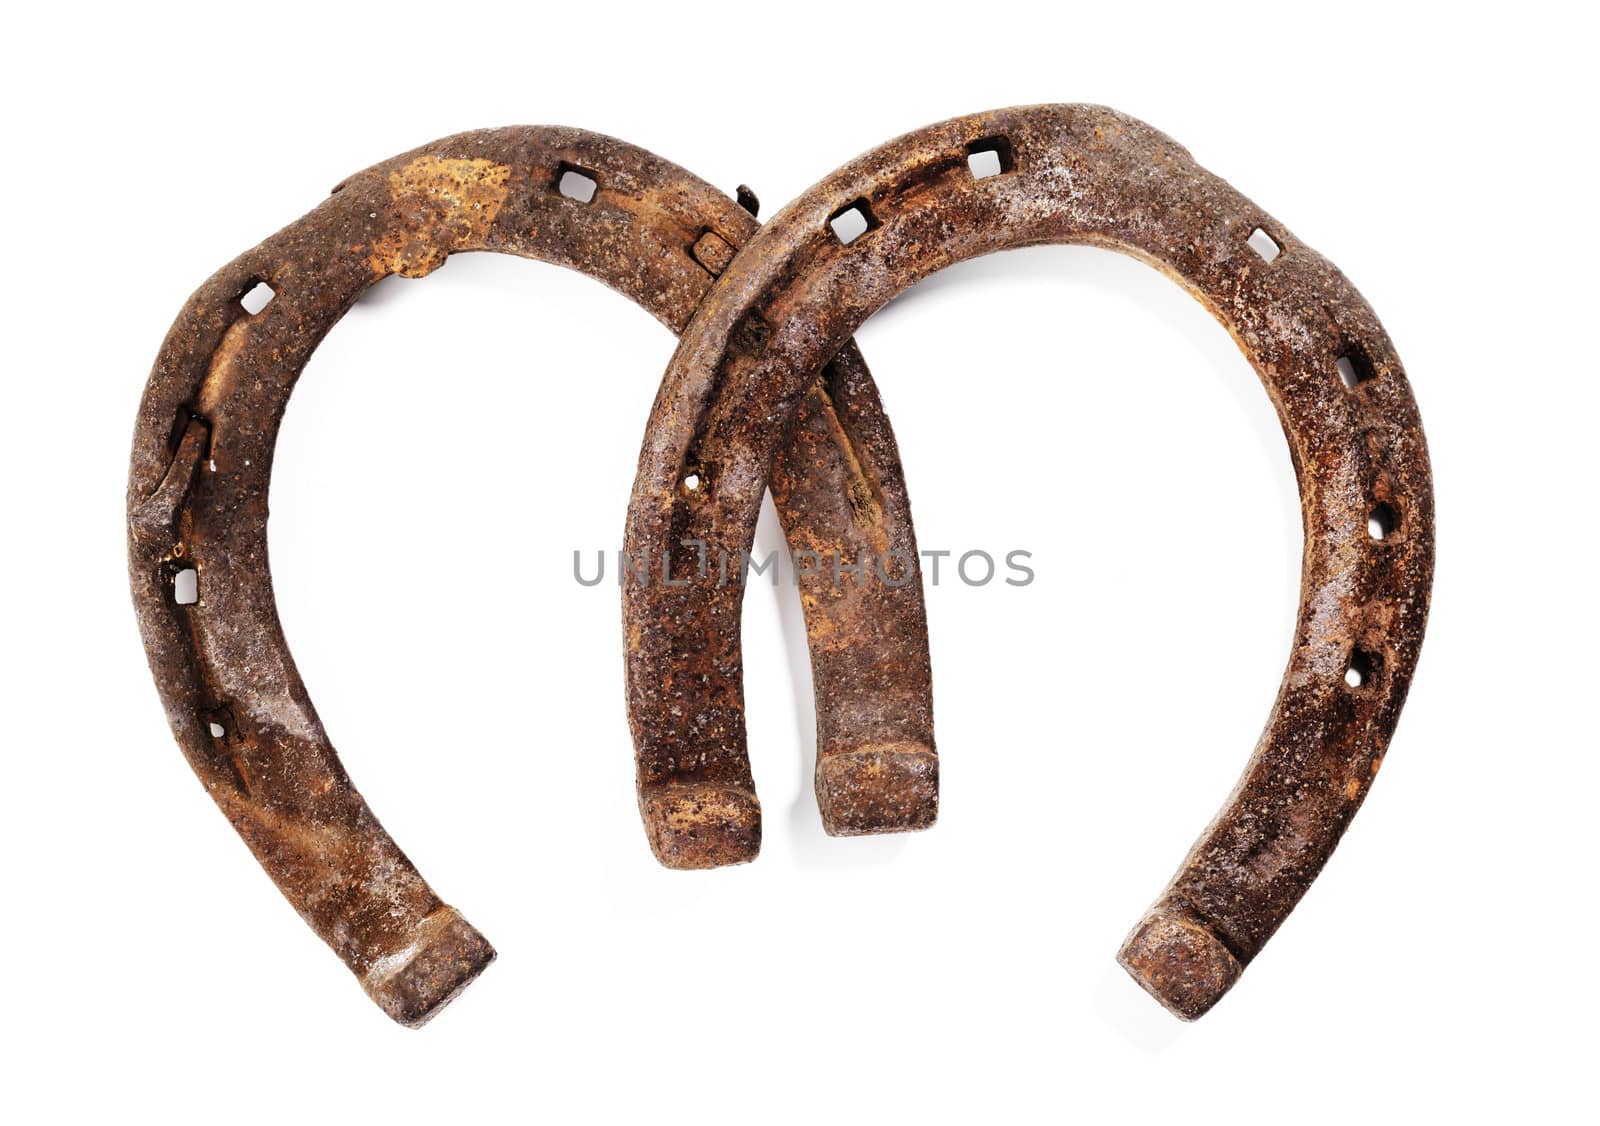 Horseshoes by Stocksnapper